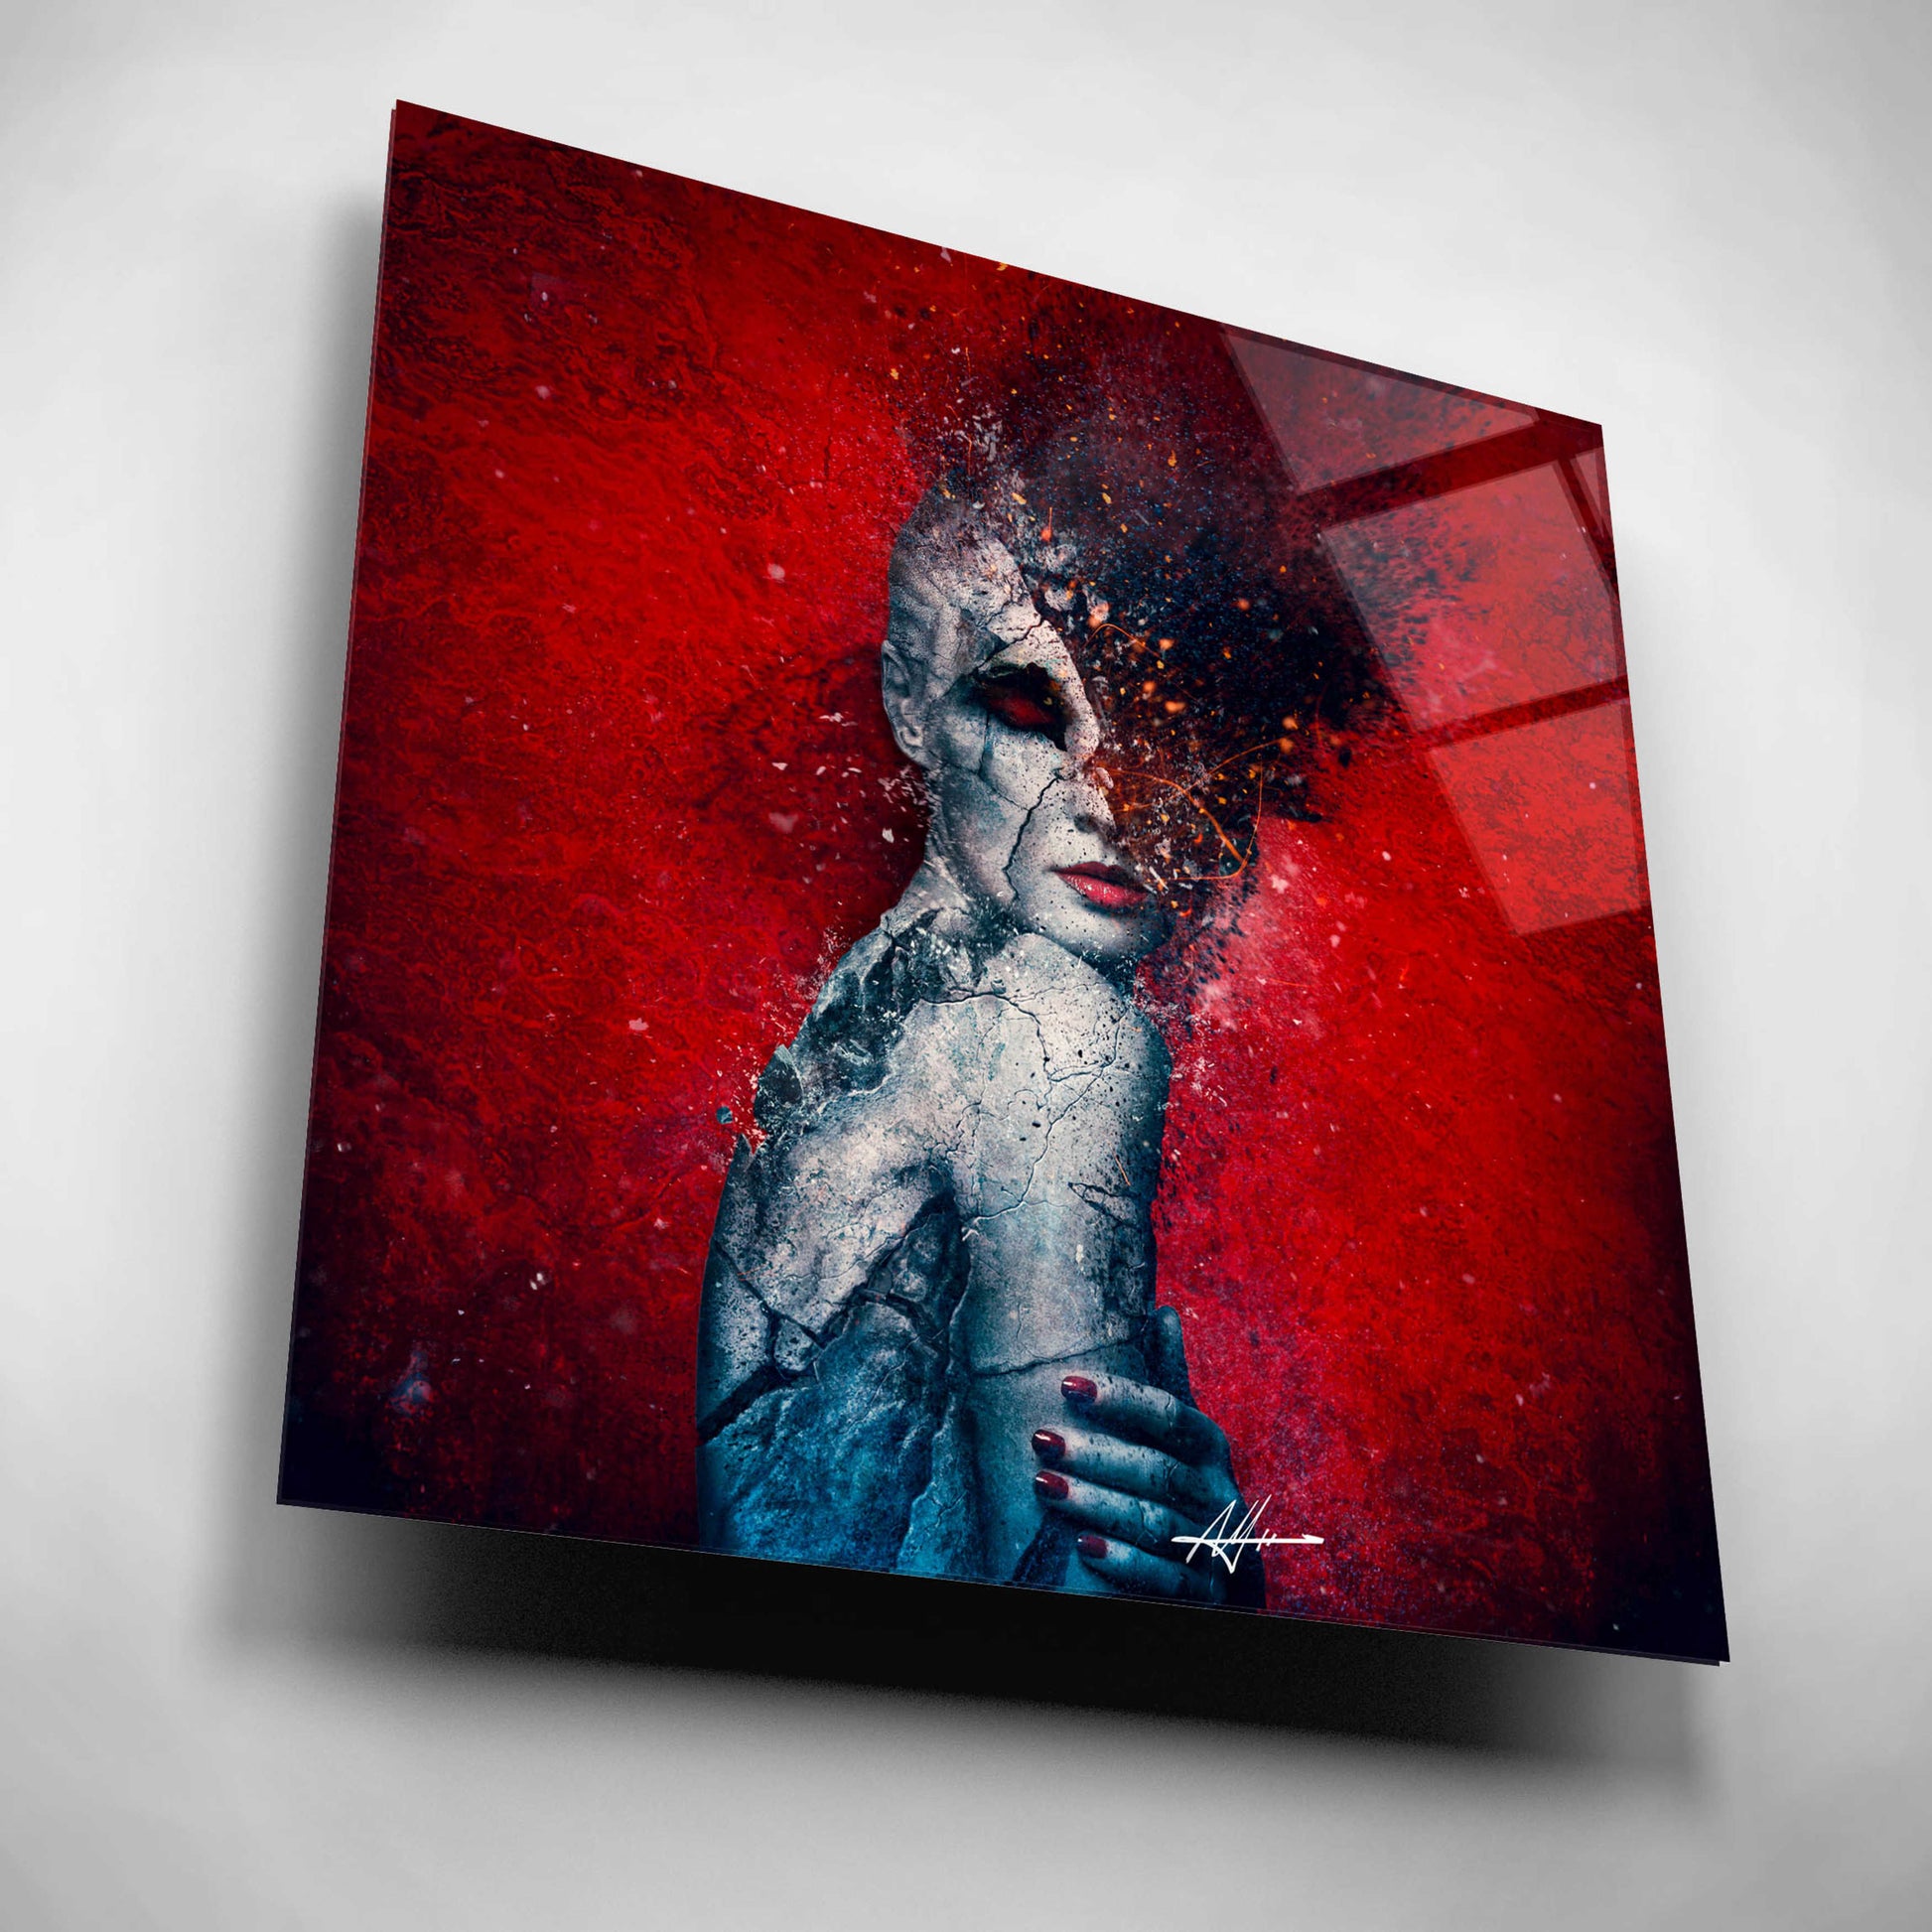 Epic Art 'Indifference' by Mario Sanchez Nevado, Acrylic Glass Wall Art,12x12